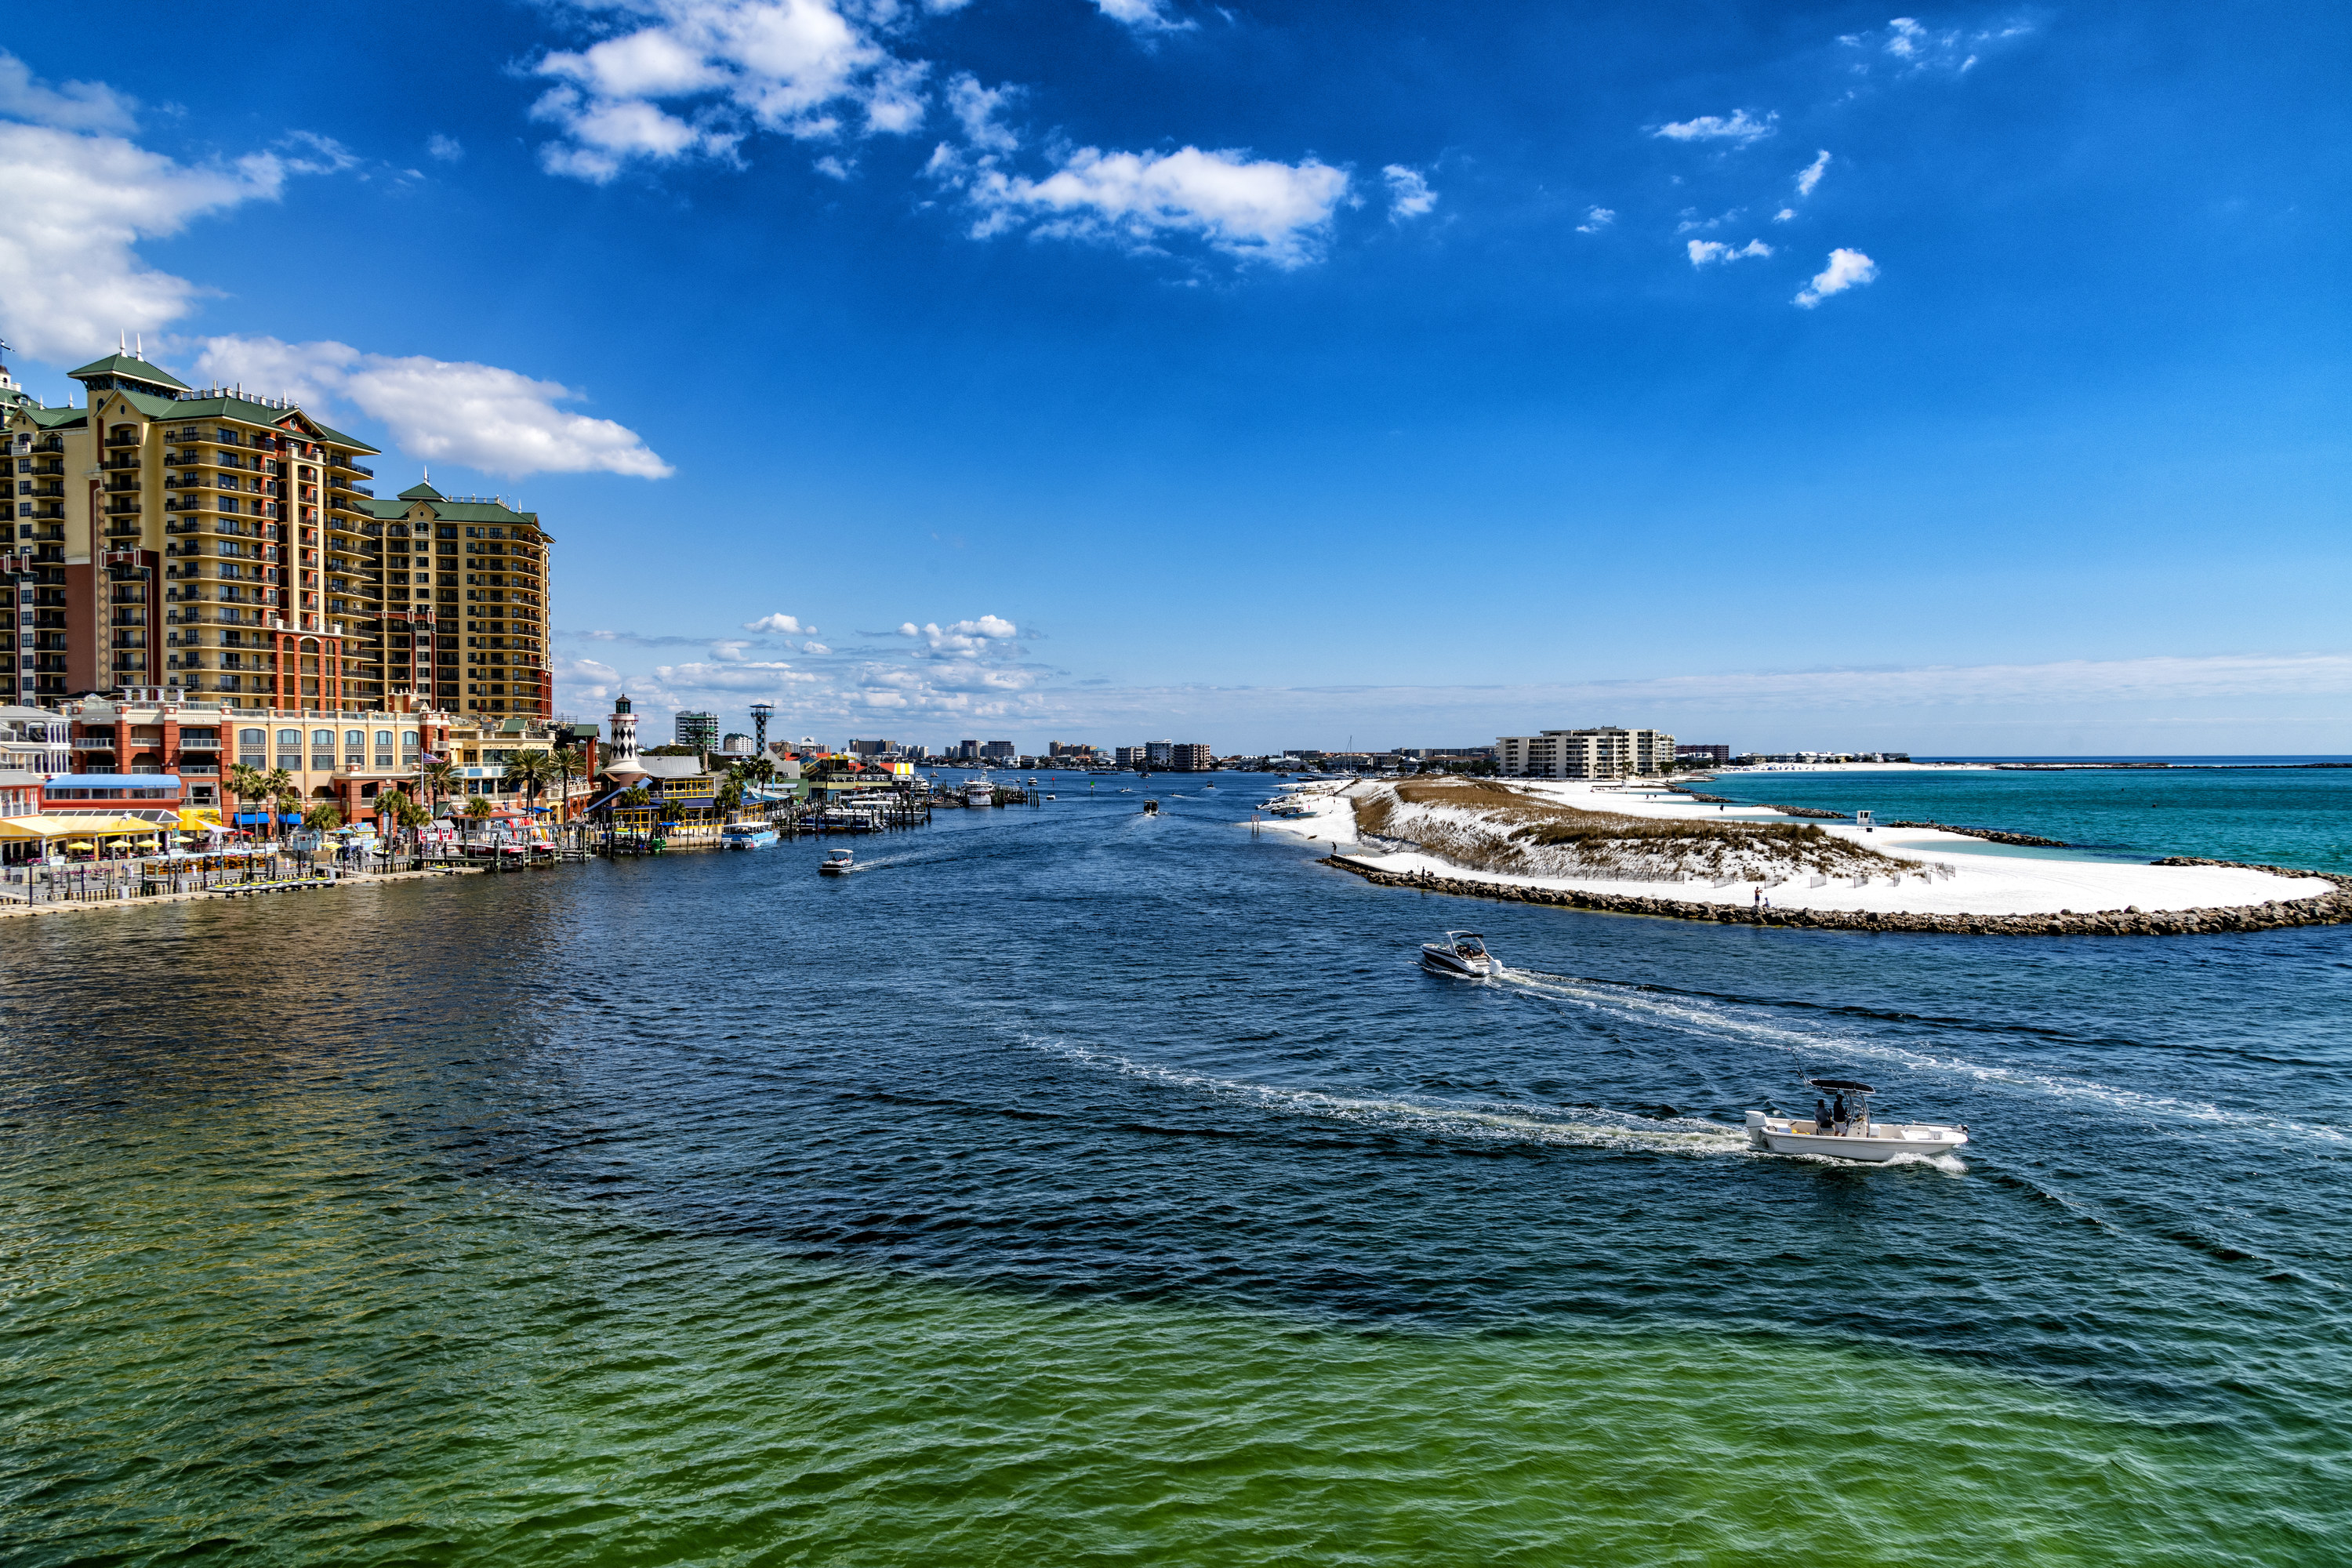 Photo of the ocean and city buildings in Destin